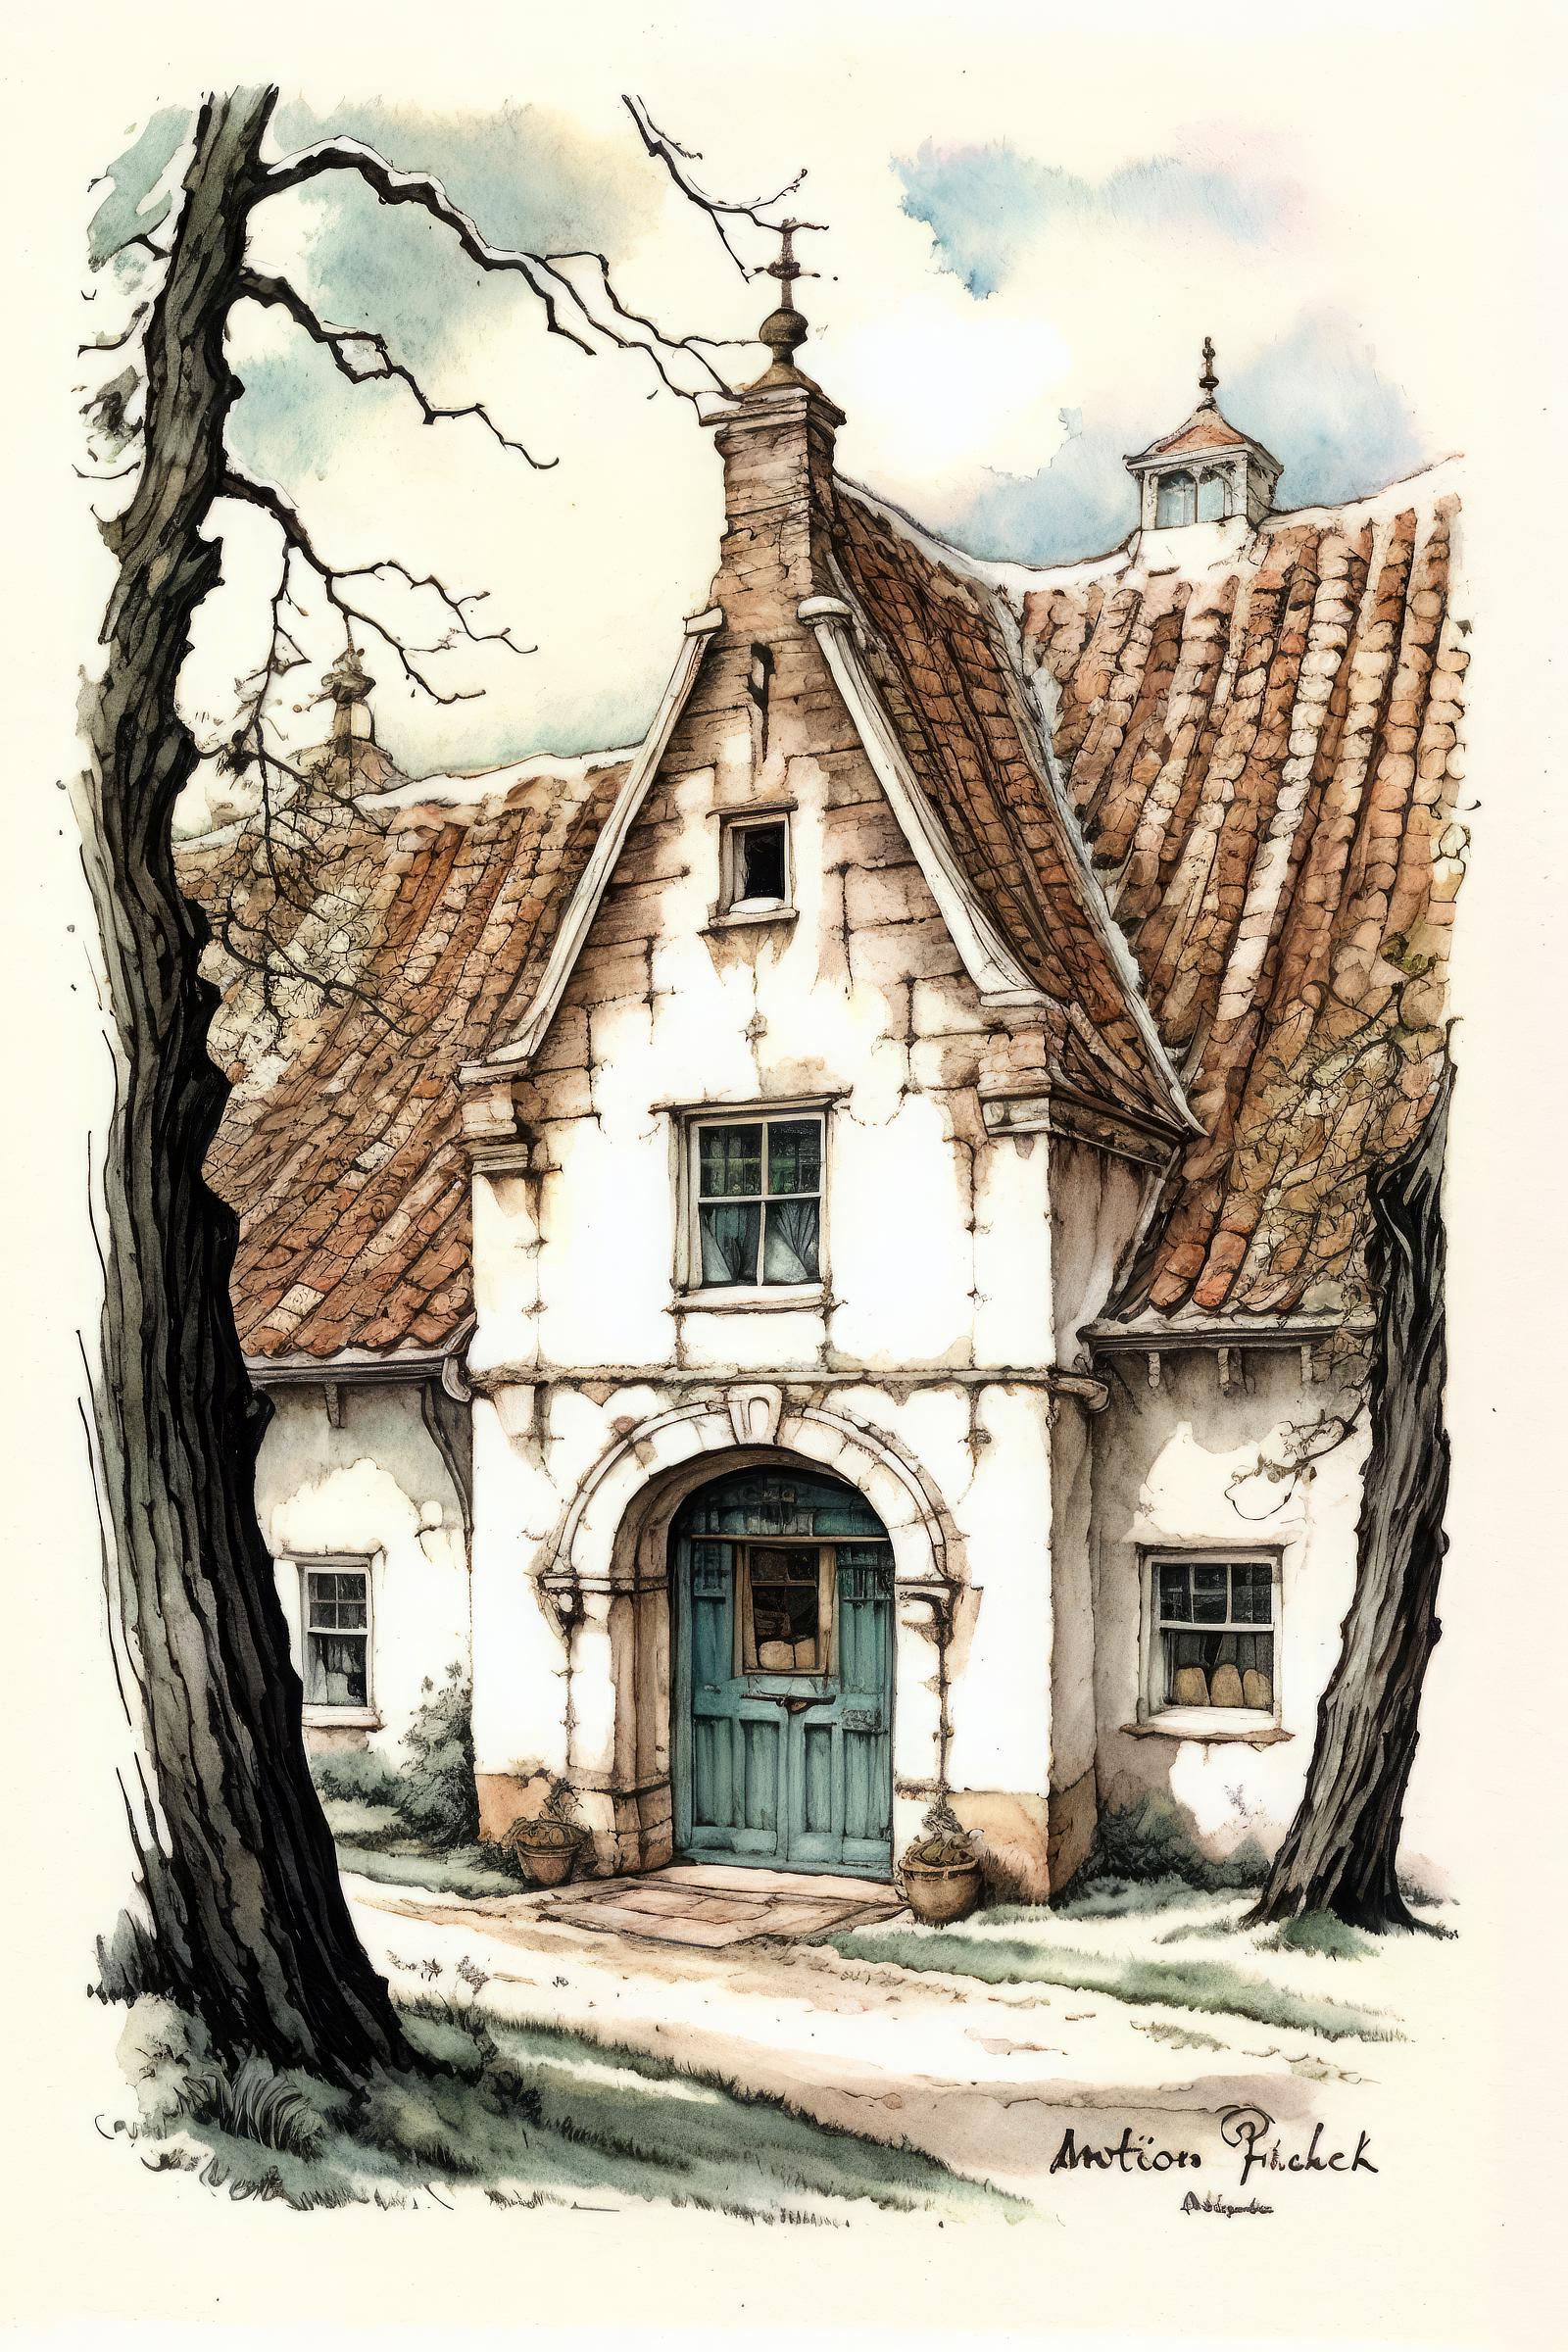 Anton Pieck Style image by Cyberdelia